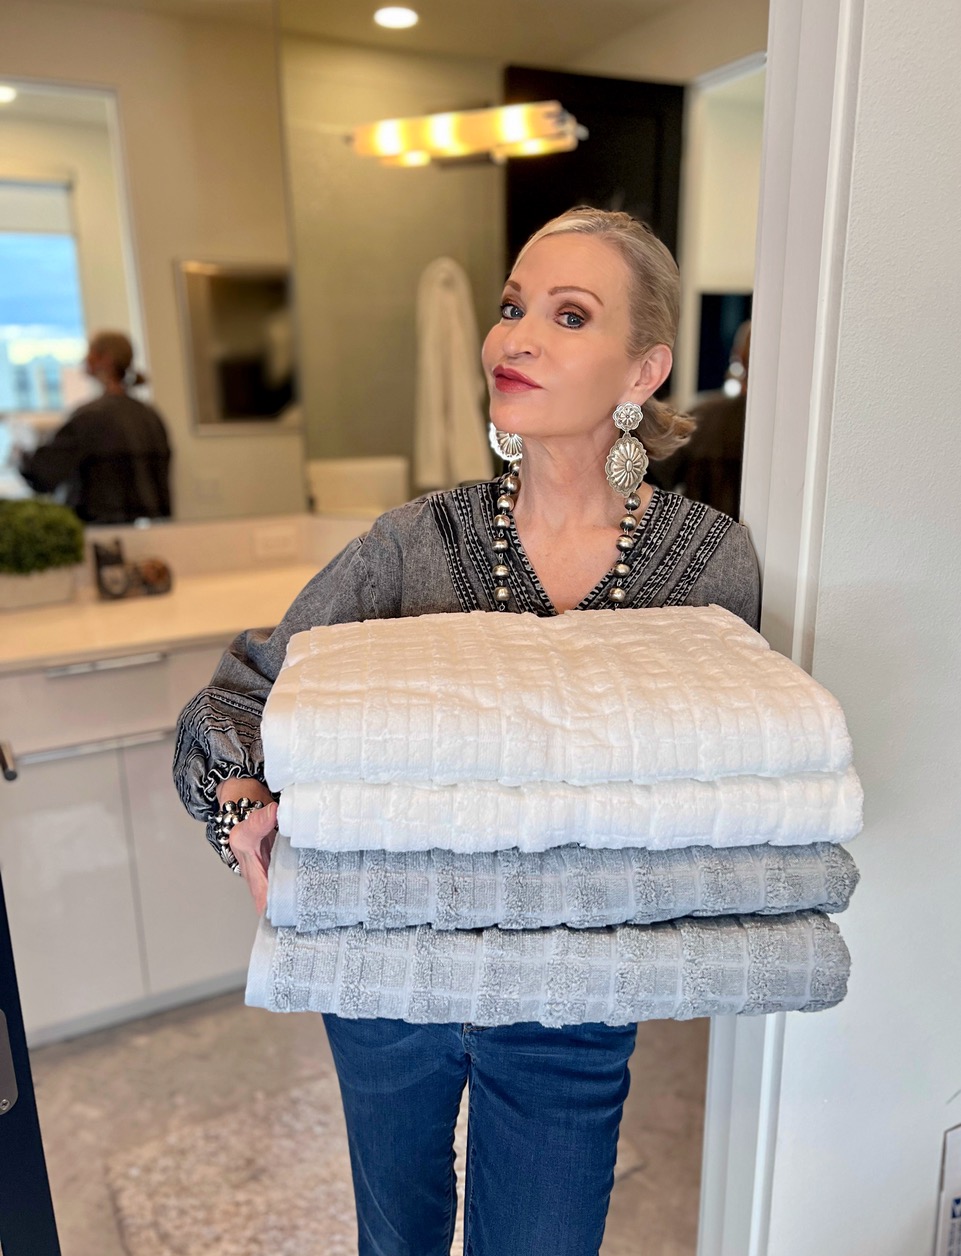 Lifestyle Influencer, Jamie Lewinger of More Than Turquoise, with Farm to Home organic cotton bath sheets towel set